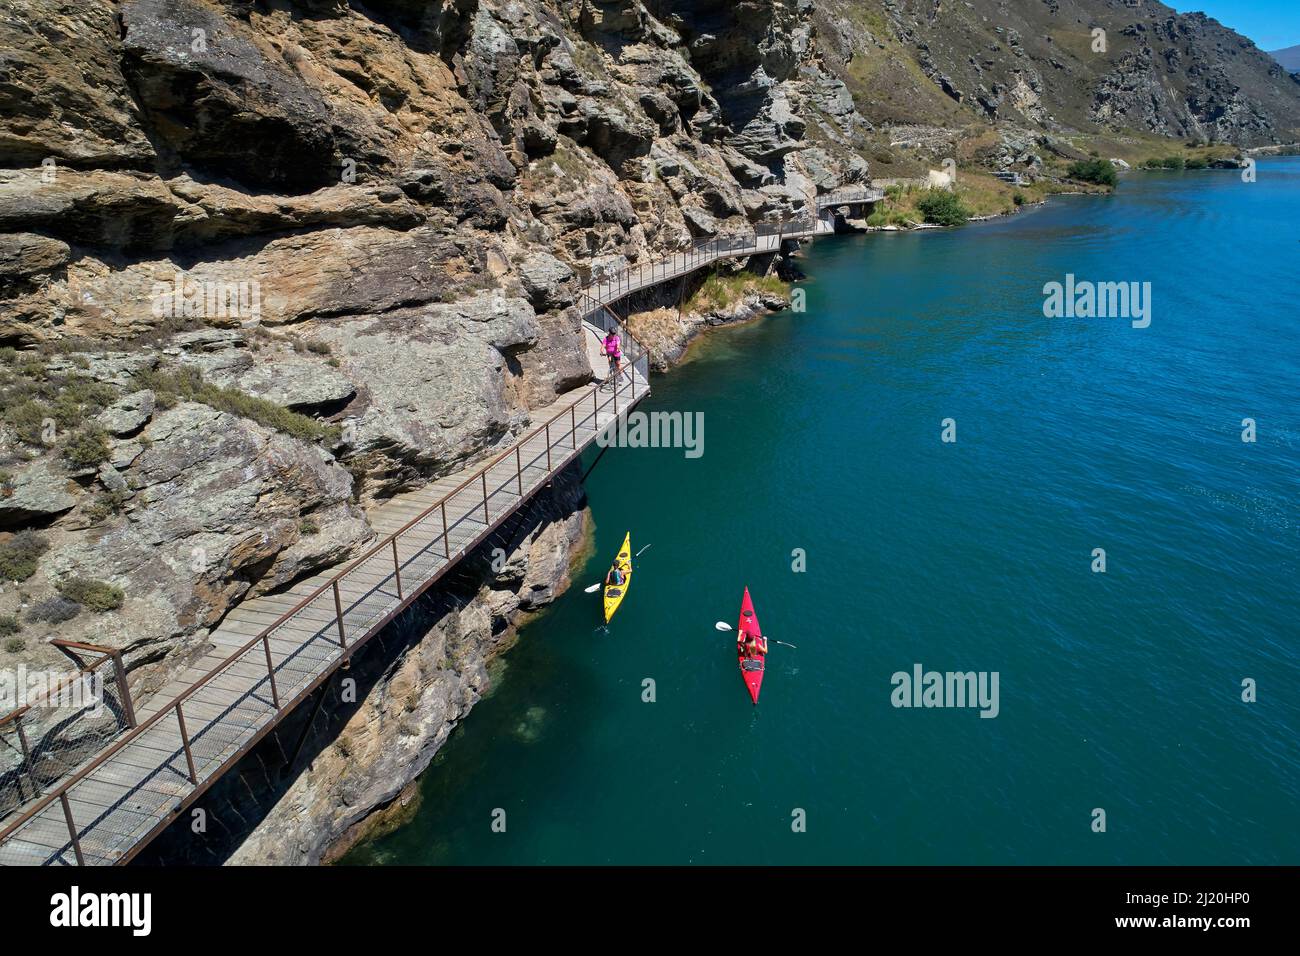 Cyclists on cantilever bridge on Lake Dunstan Cycle Trail, and kayakers, Lake Dunstan, near Cromwell, Central Otago, South Island, New Zealand - drone Stock Photo